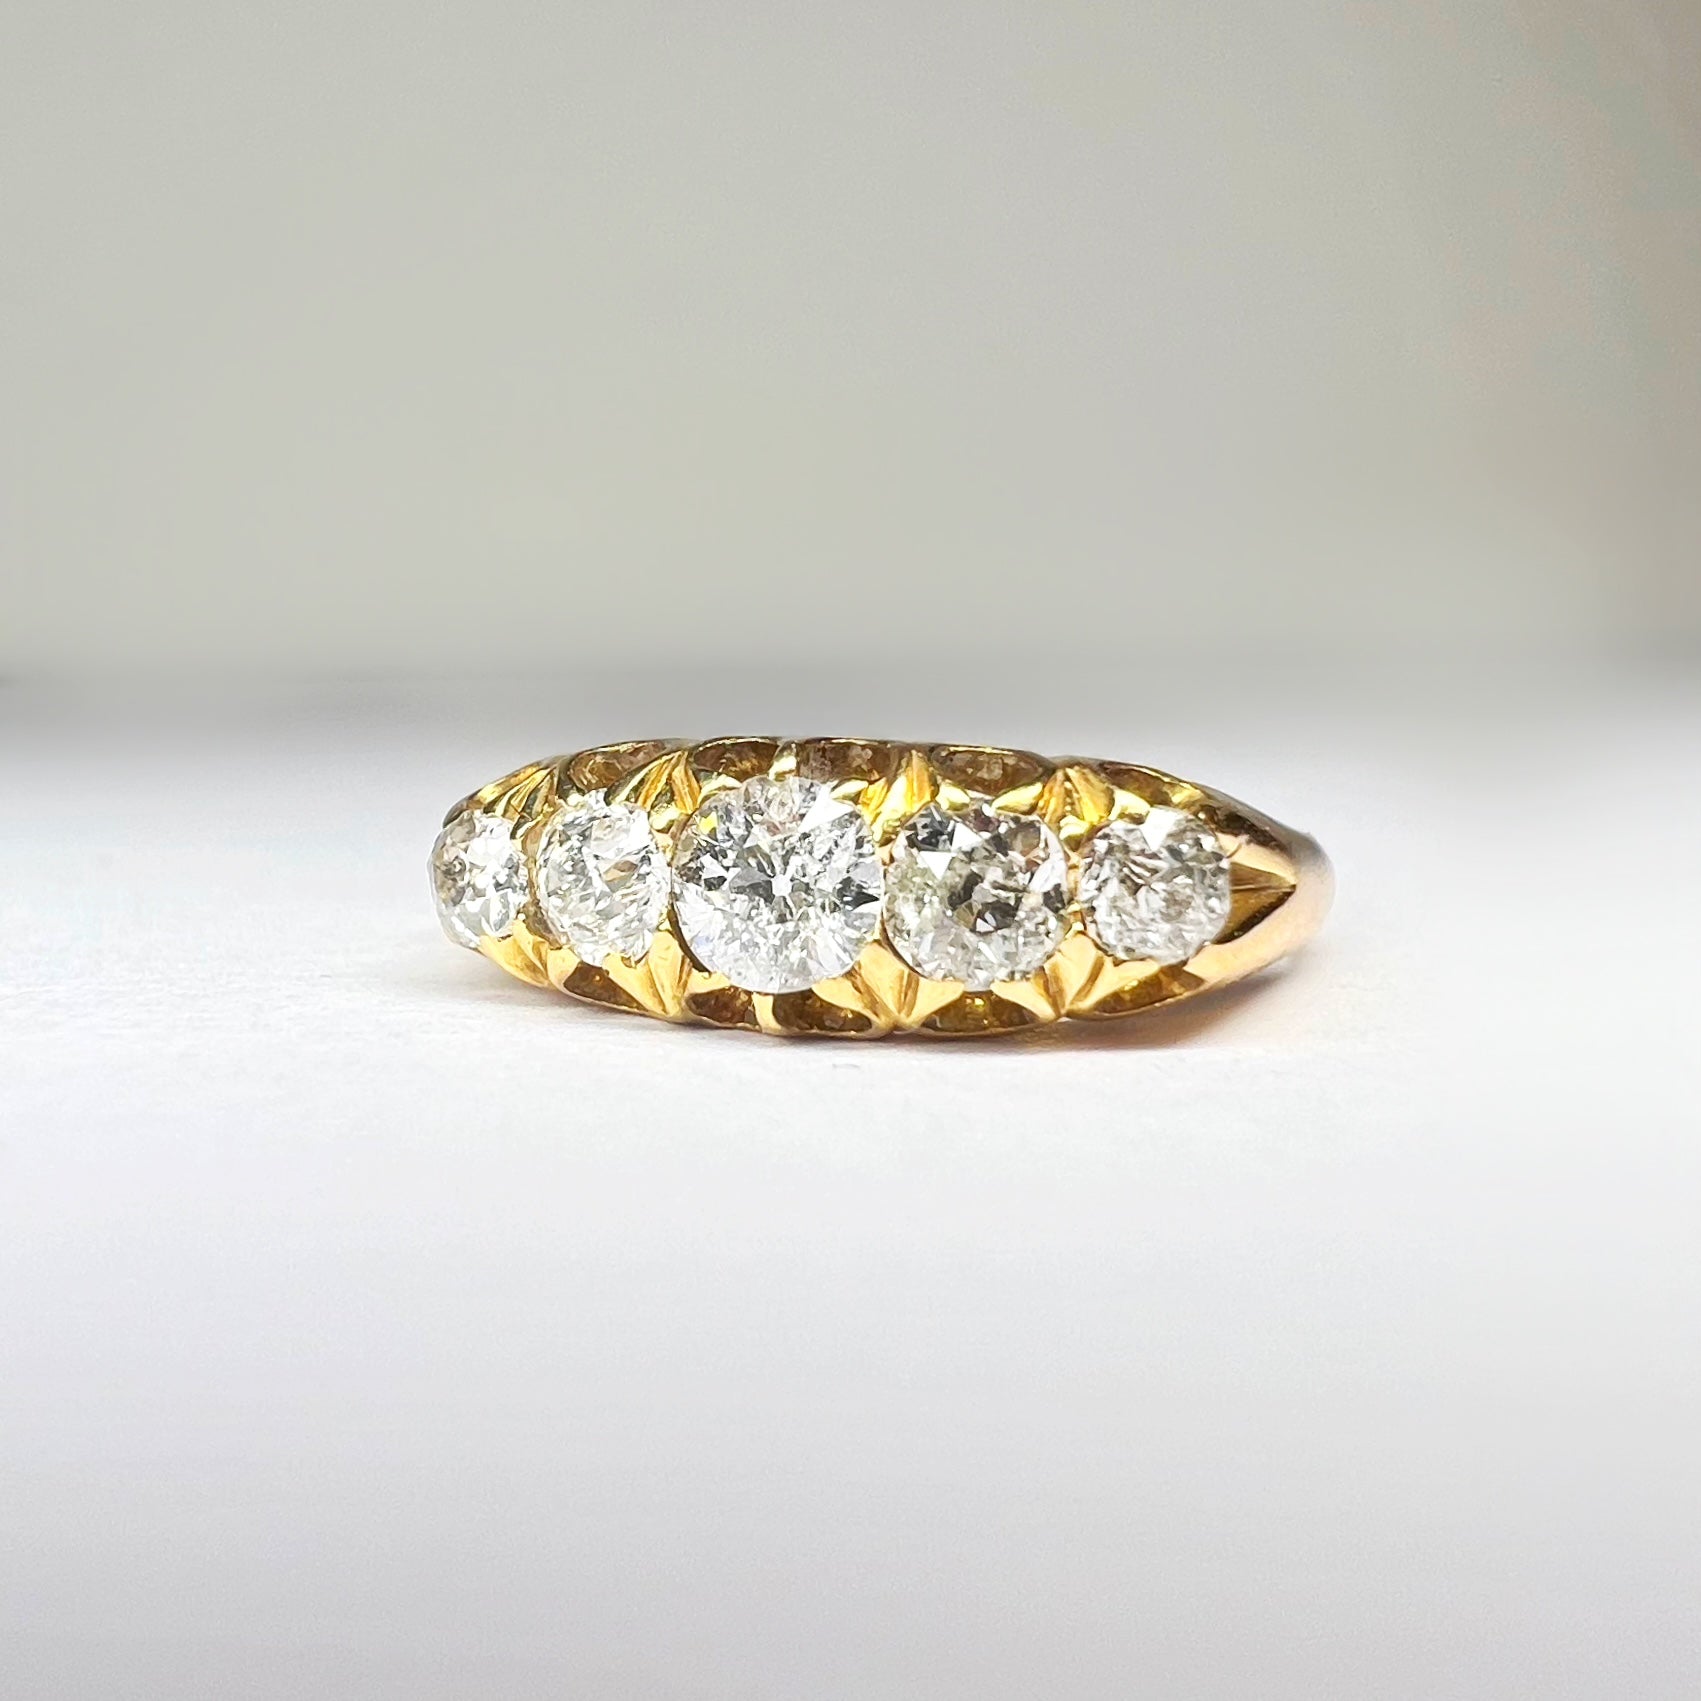 Antique Victorian 0.45ct Diamond and 18ct Gold 5 Stone Ring